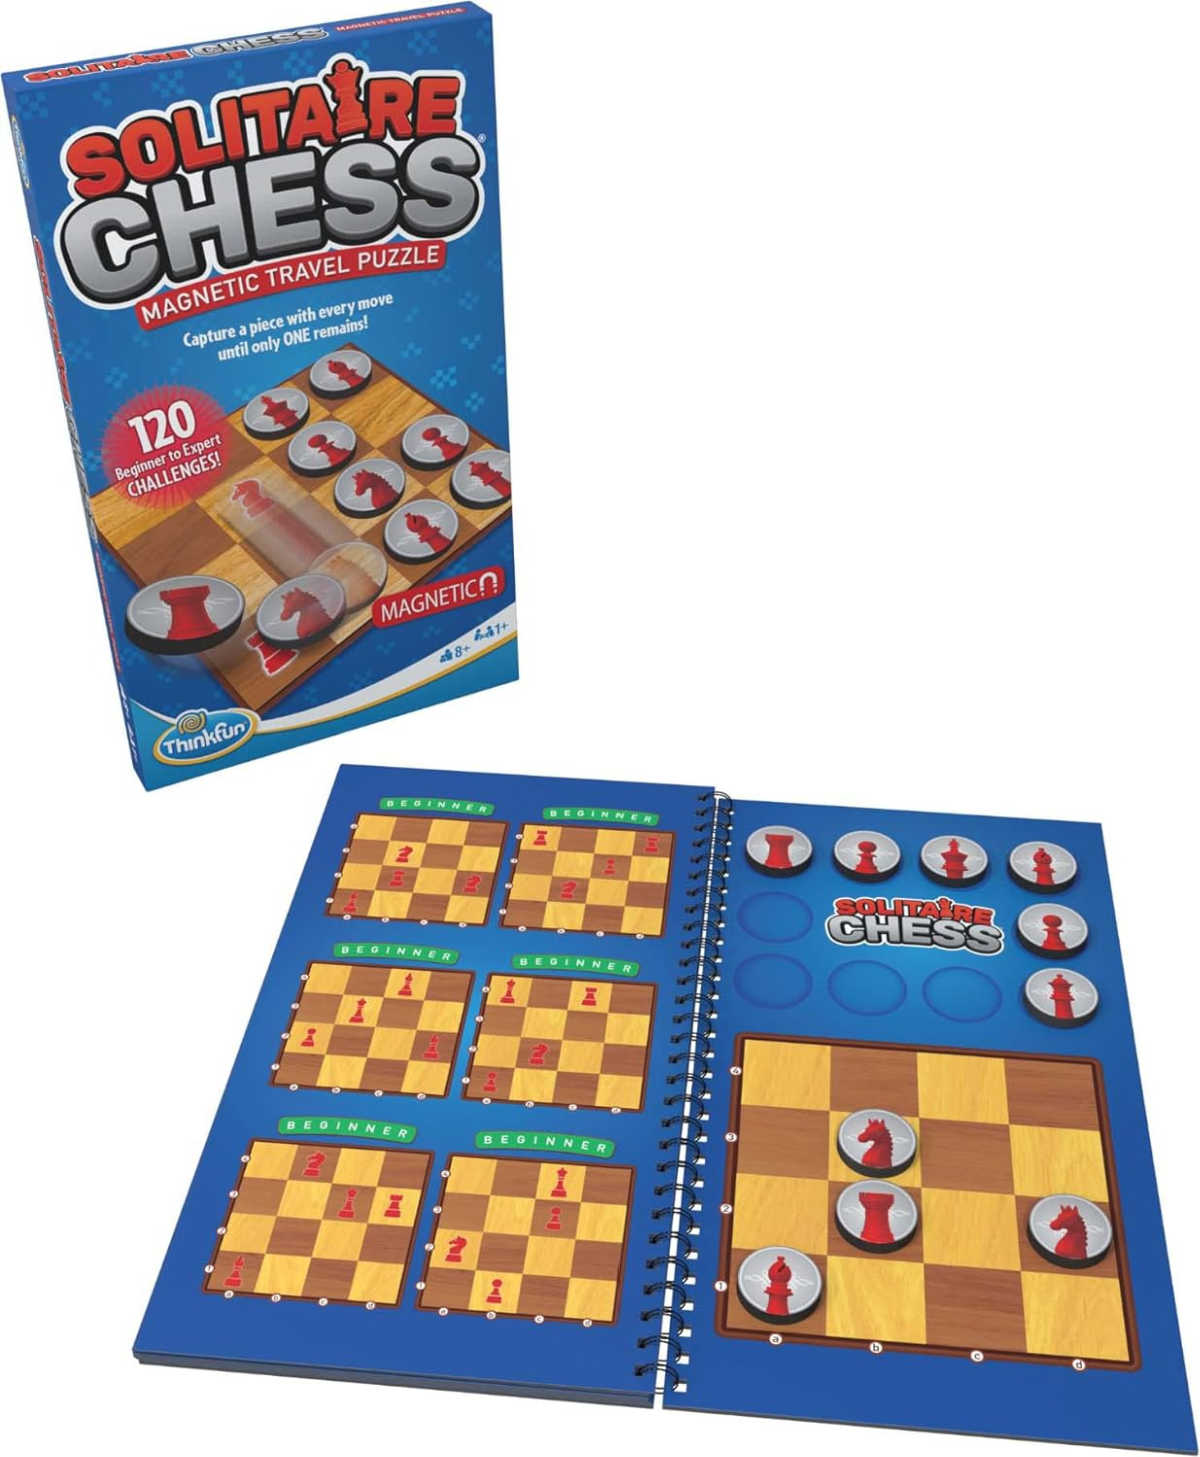 Solitaire chess game with open challenge booklet. 